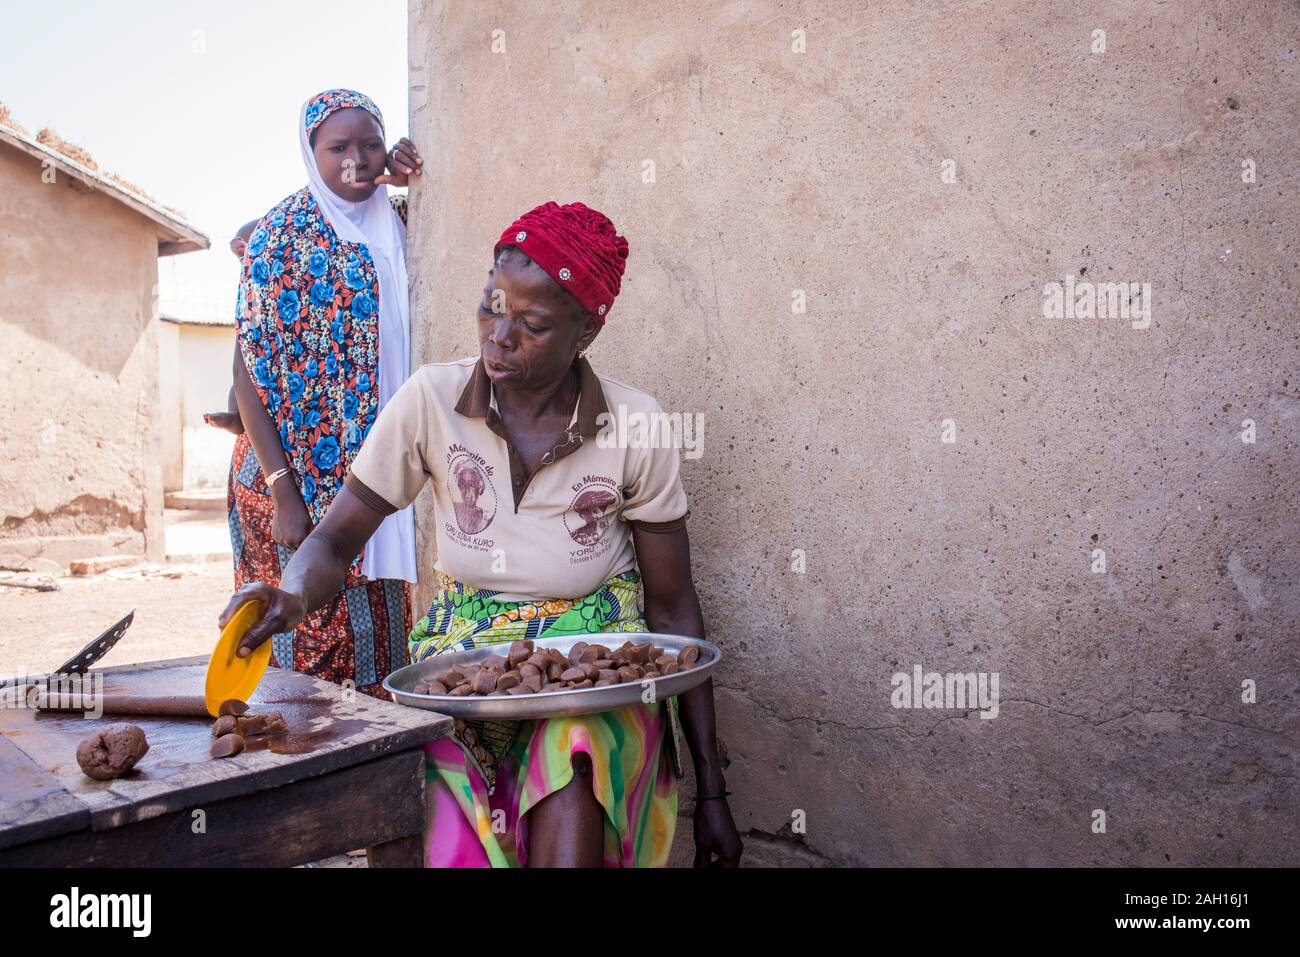 Kandi, Benin, african woman, cooking, open fire, red knit hat, african village, Stock Photo